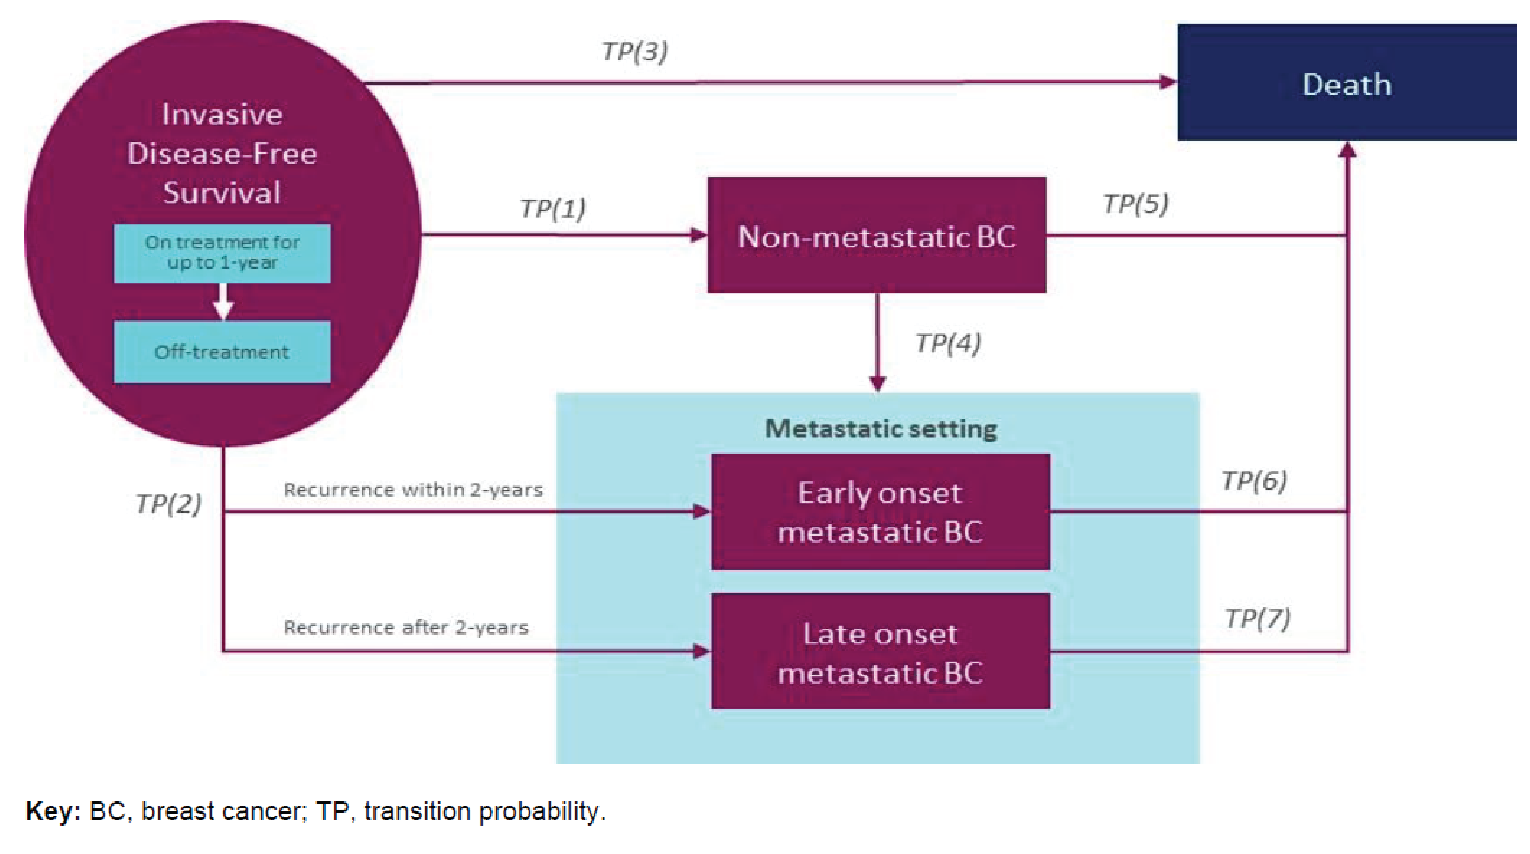 The sponsor submitted a semi-Markov model consisting of 5 health states: invasive disease free survival (IDFS), nonmetastatic breast cancer (non-mBC), early onset metastatic breast cancer (mBC), late onset mBC, and death. The time point determining early versus late onset metastatic breast cancer was set as 24 months in the base case. All health states were tunnel states; therefore, patients could only progress through health states via a predetermined sequence. Patients entered the model in the IDFS health state and could then transition into either the non-mBC, early mBC, late mBC, or death health states. Patients in the non-mBC health state could transition to the early onset mBC, late onset mBC, or death health states, whereas those in the early or late onset mBC could only transition to death.